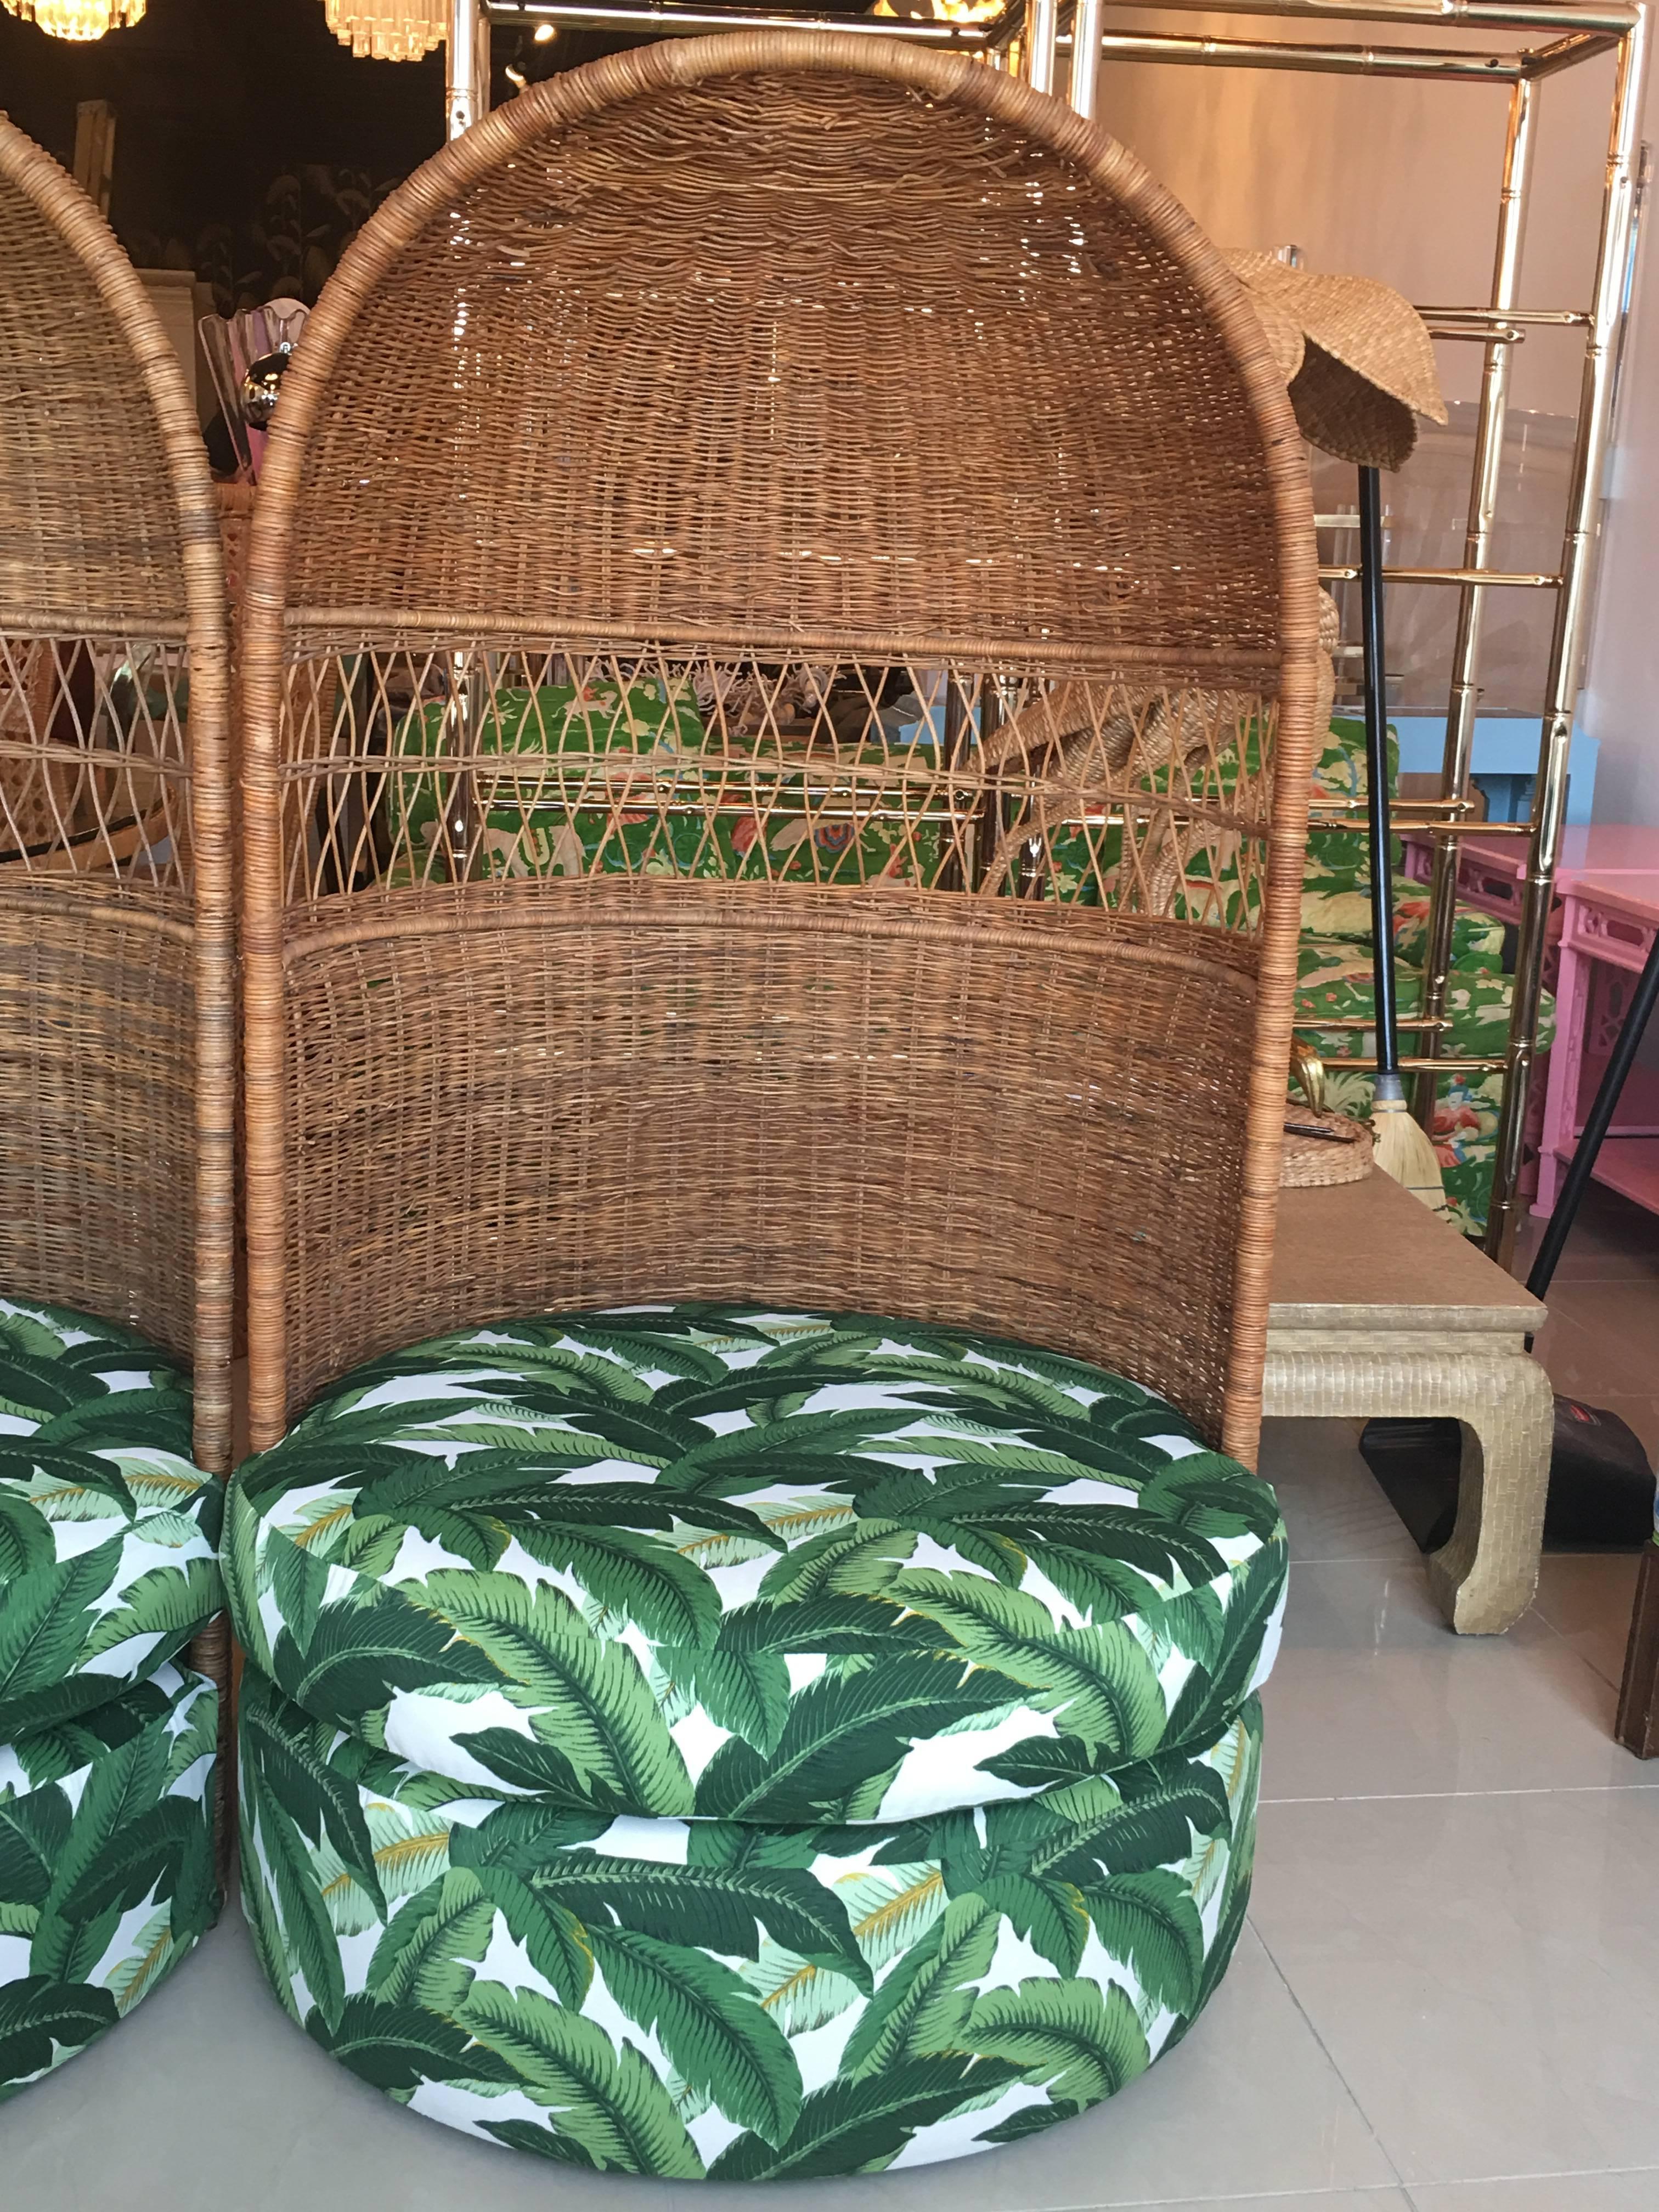 Upholstery Rattan Dome Hooded Pair of Vintage Chairs Tropical Leaf Palm Beach Wicker Bamboo